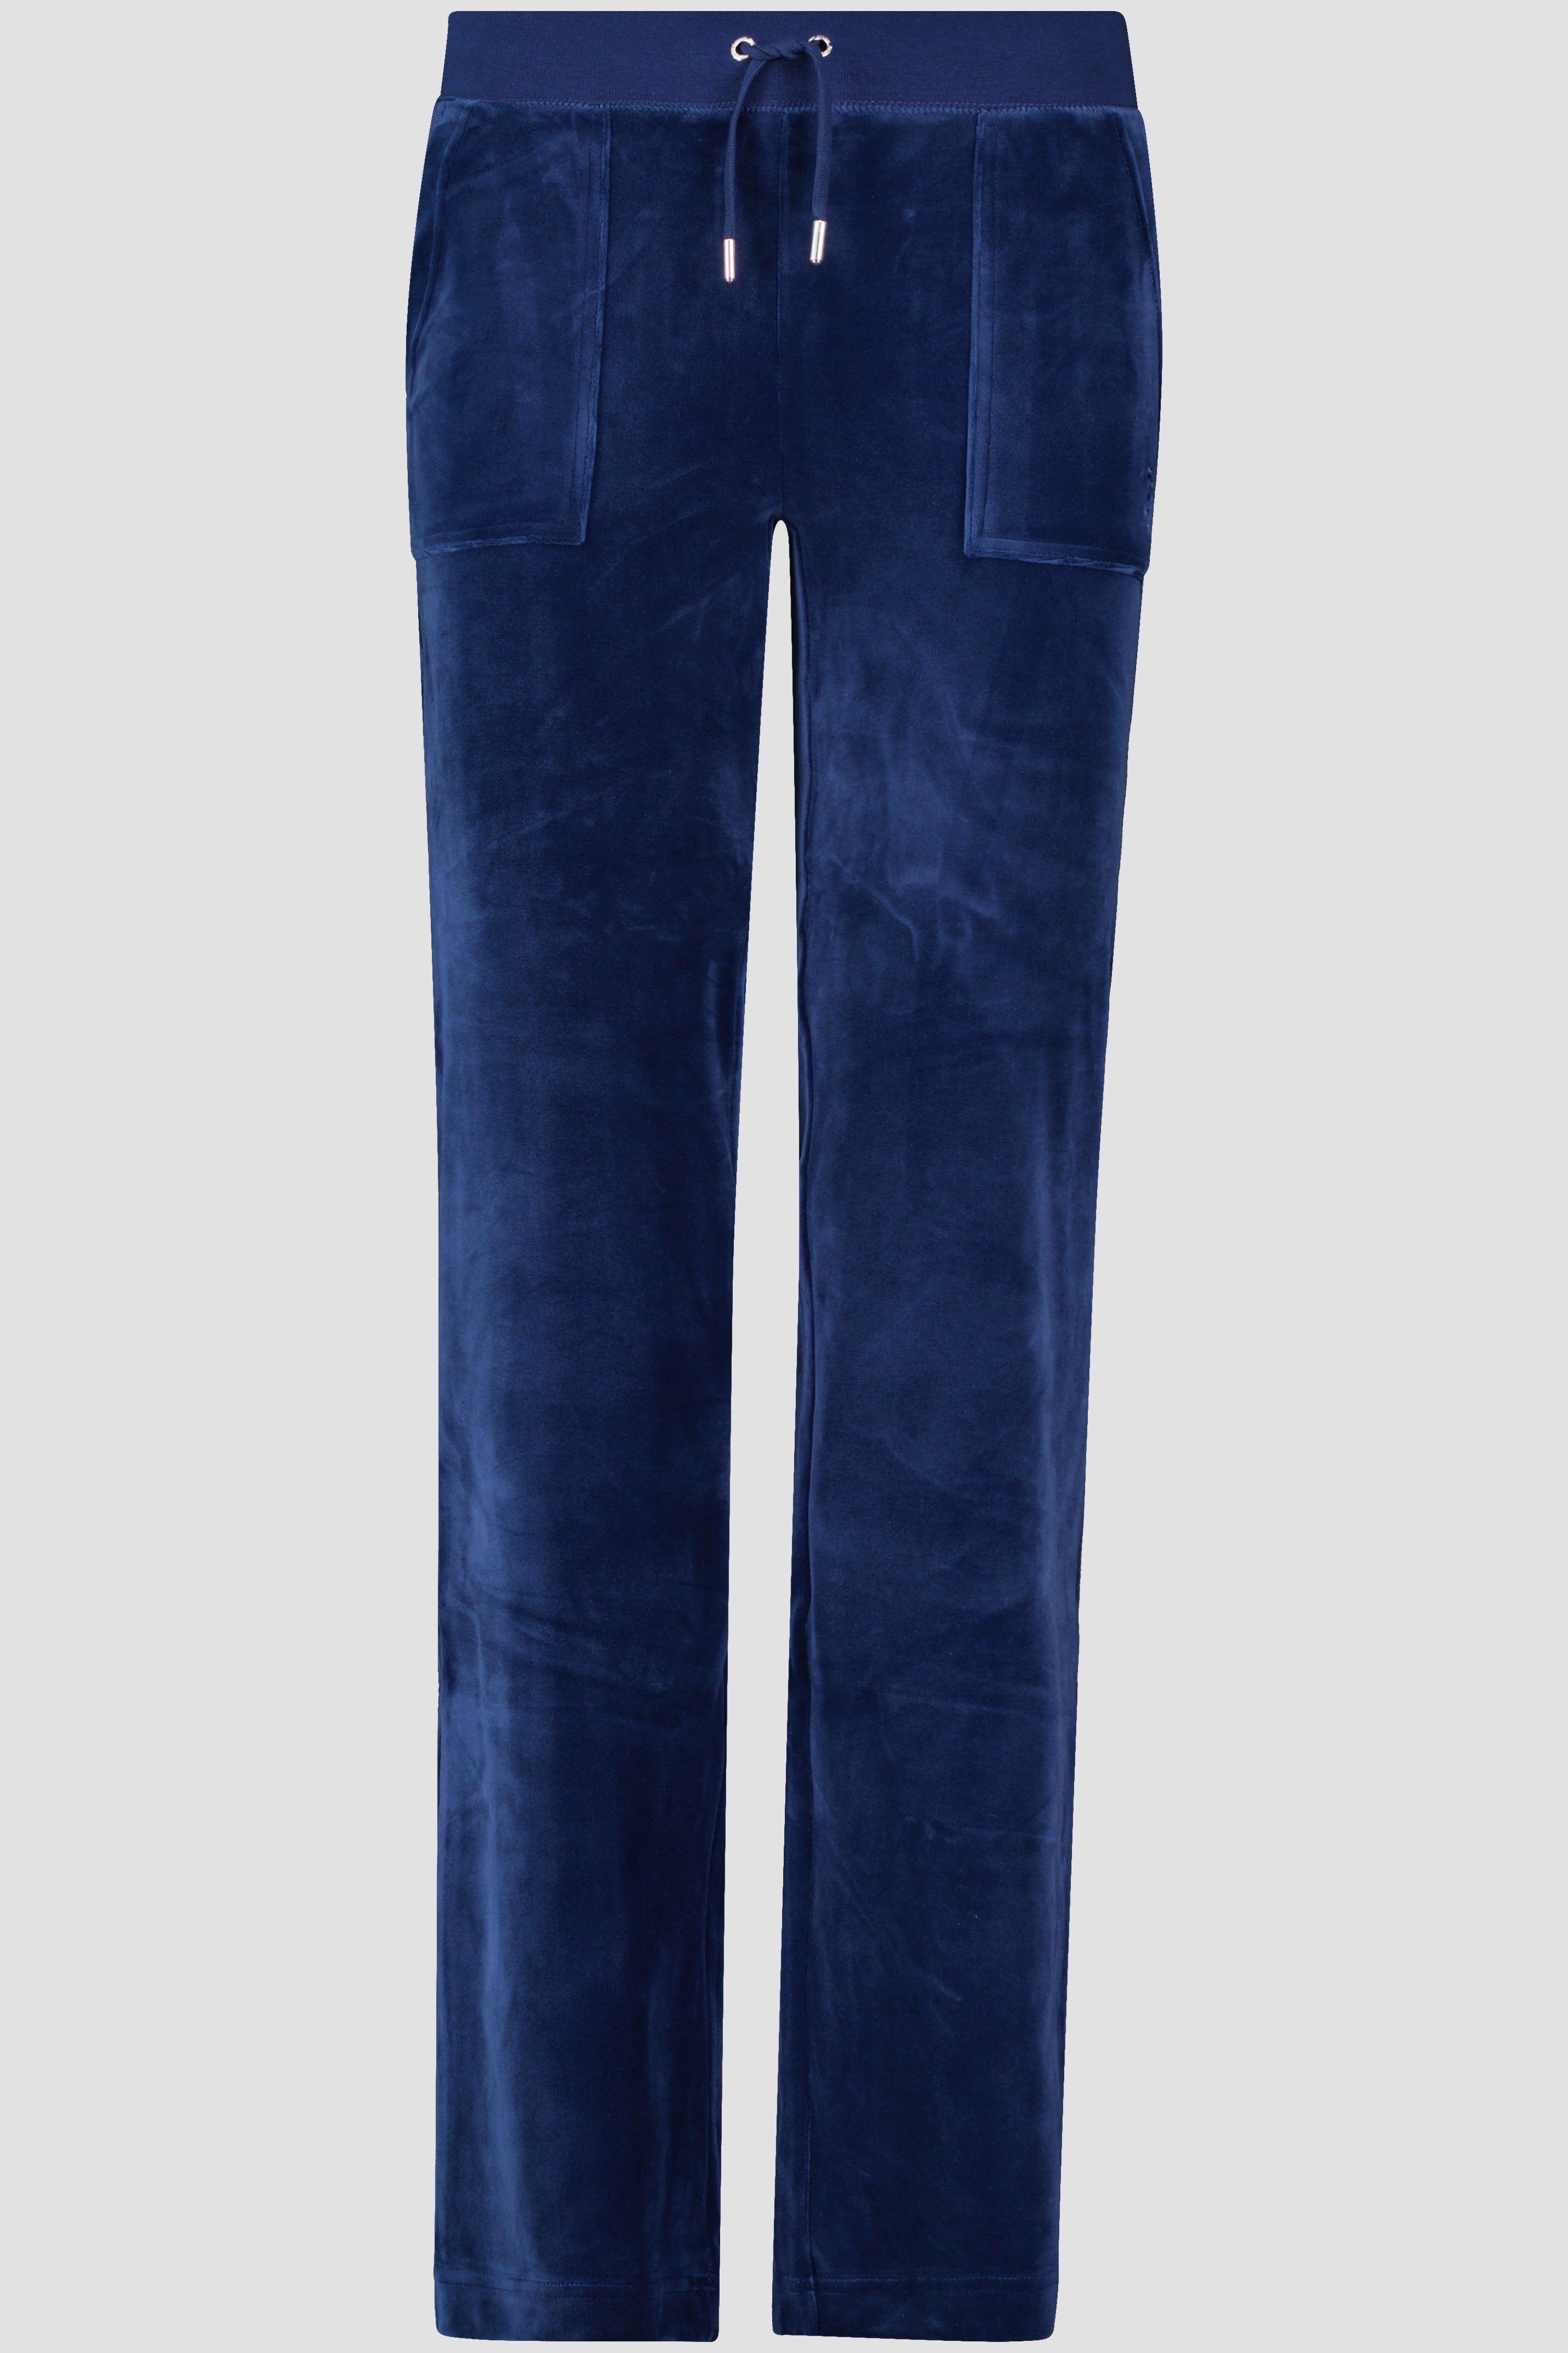 Women's Juicy Couture Del Ray Blue Depths Straight Leg Track Pants